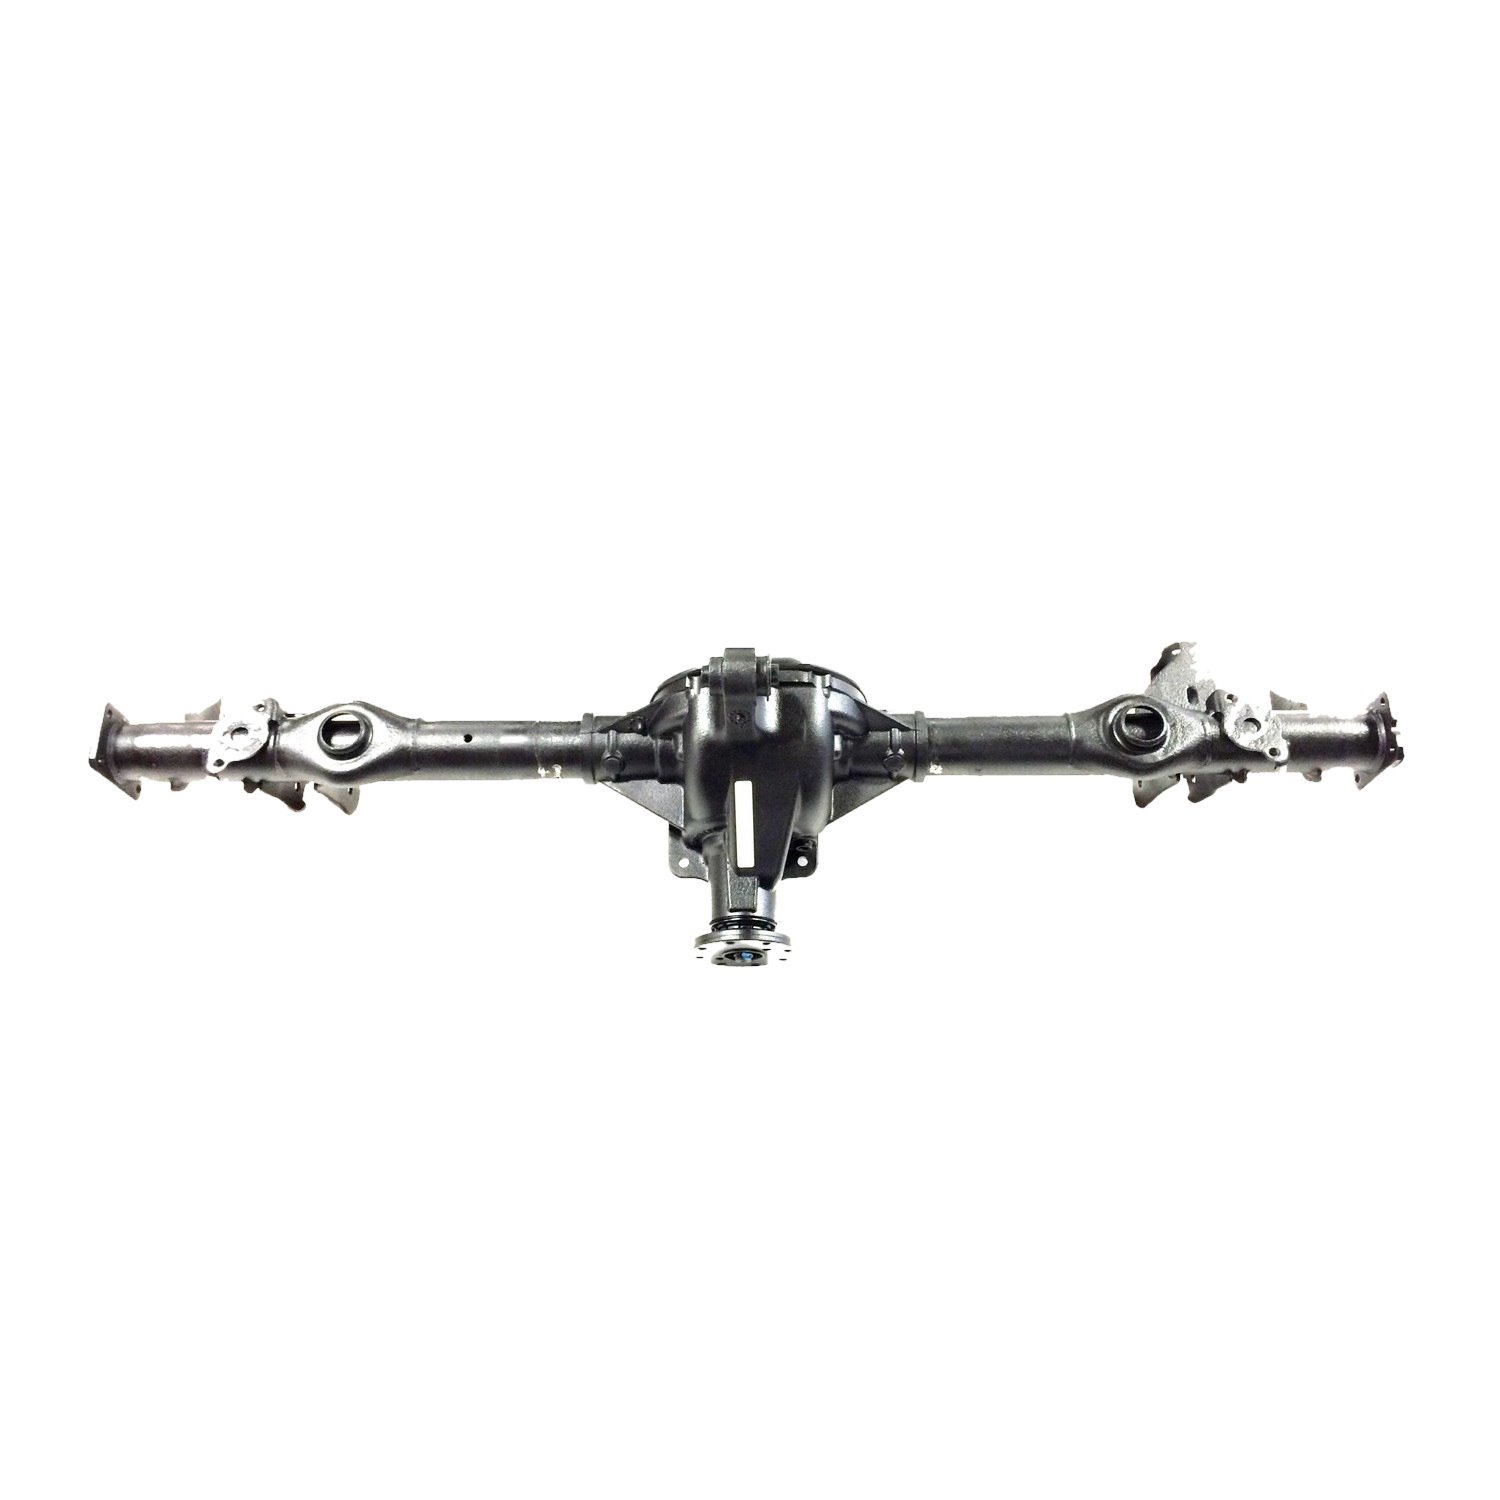 Remanufactured Axle Assy, Chrysler 8.25 In., 3.55 Ratio, w/ Posi Traction